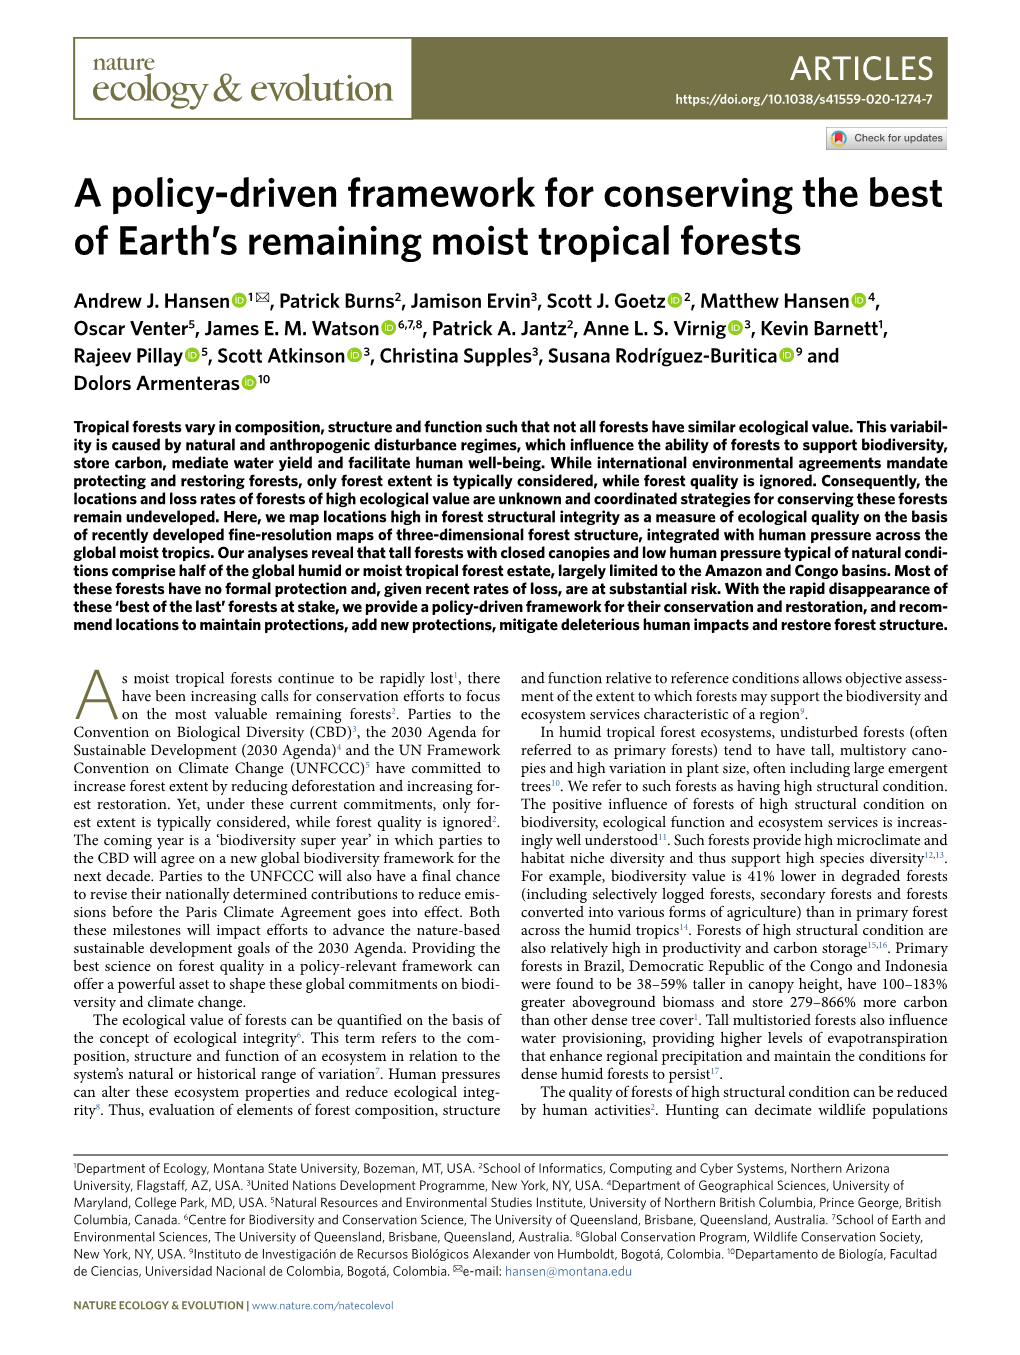 A Policy-Driven Framework for Conserving the Best of Earth's